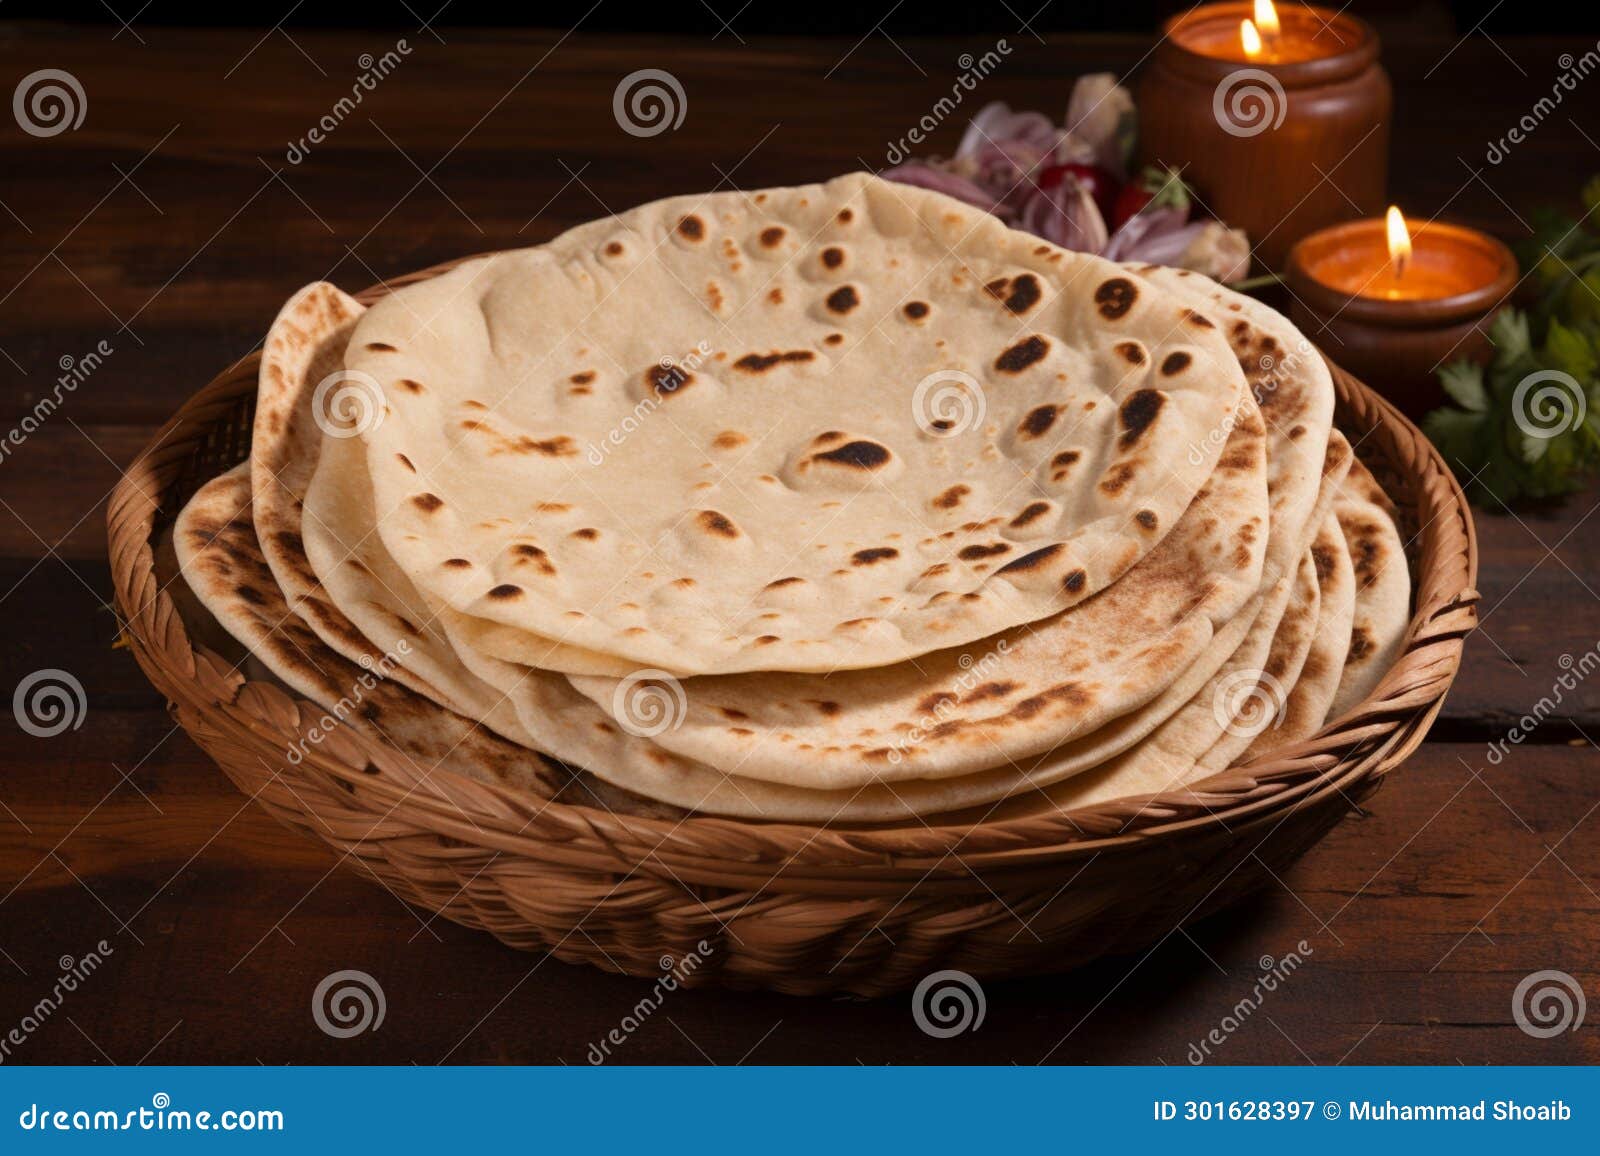 31,022 Chapati Royalty-Free Photos and Stock Images | Shutterstock